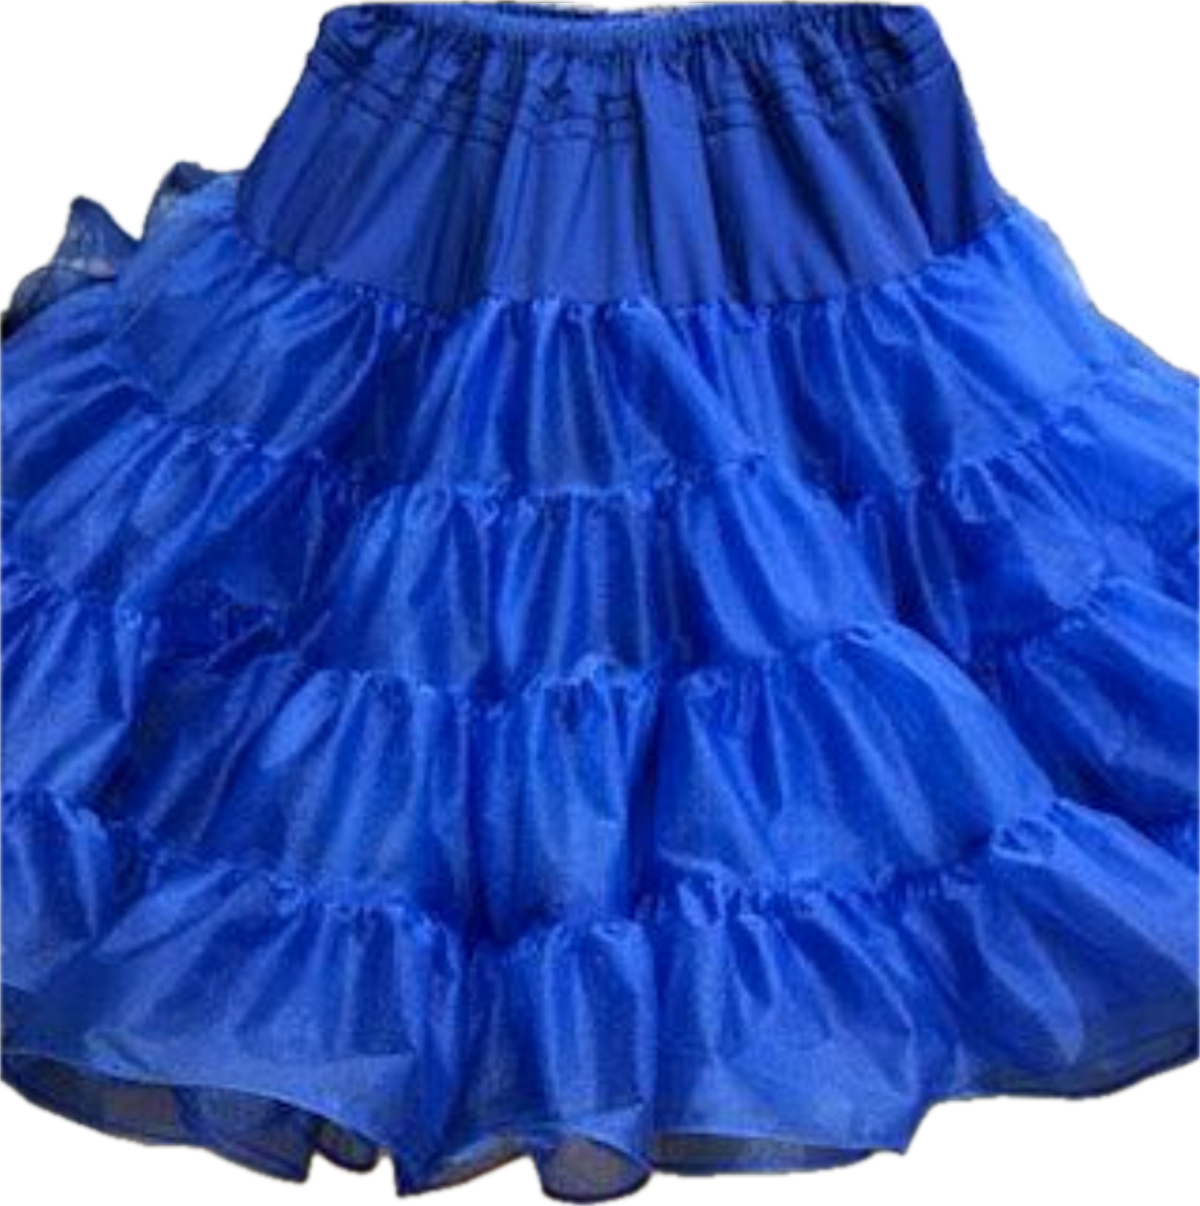 A blue Organdy Stiff Petticoat with ruffles made of fabric by Square Up Fashions.